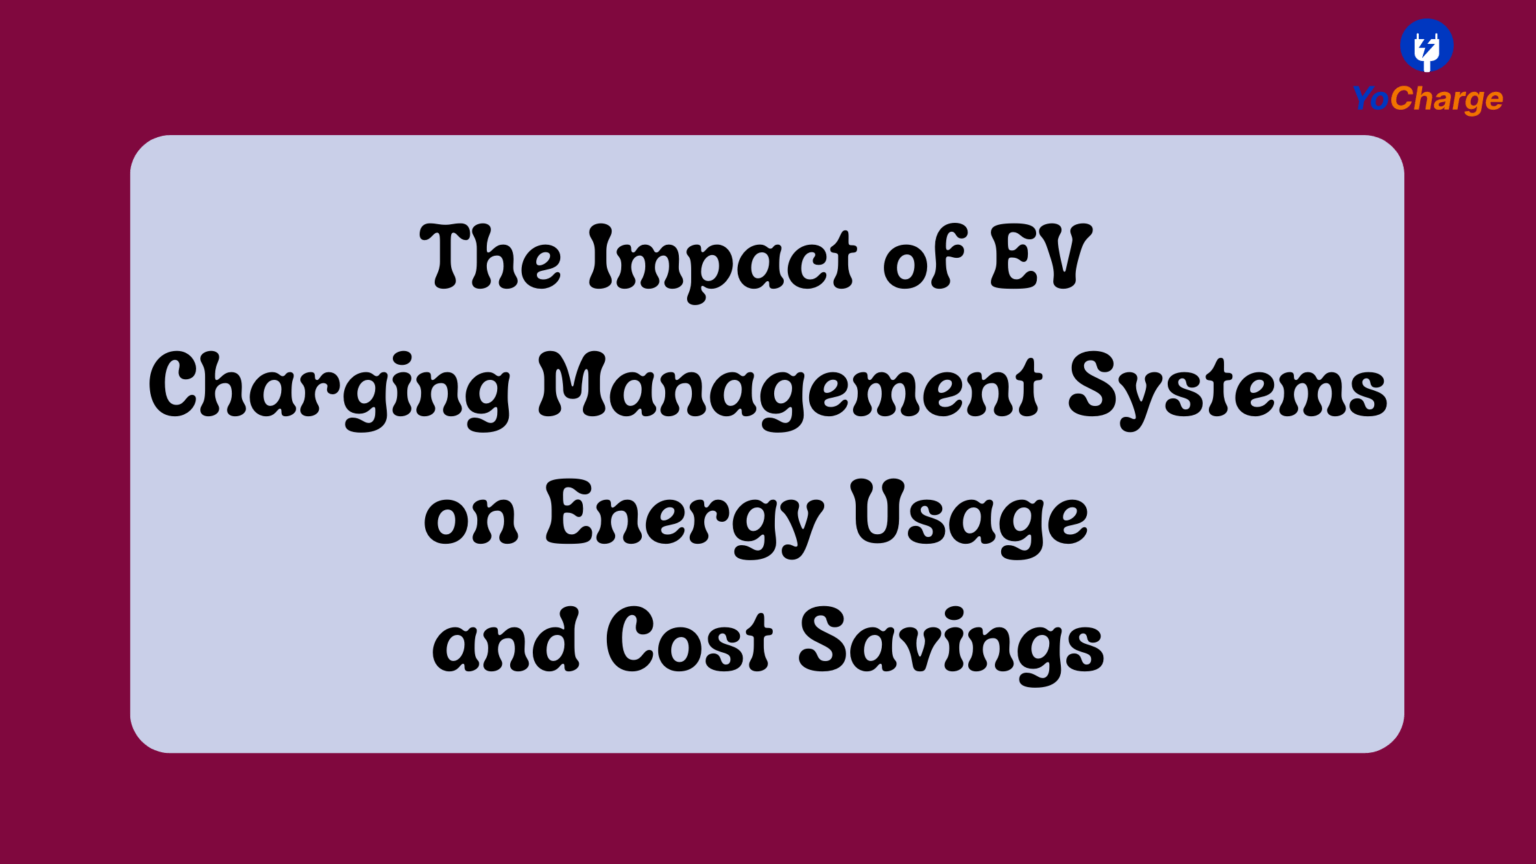 The Impact of EV Charging Management Systems on Energy Usage and Cost Savings